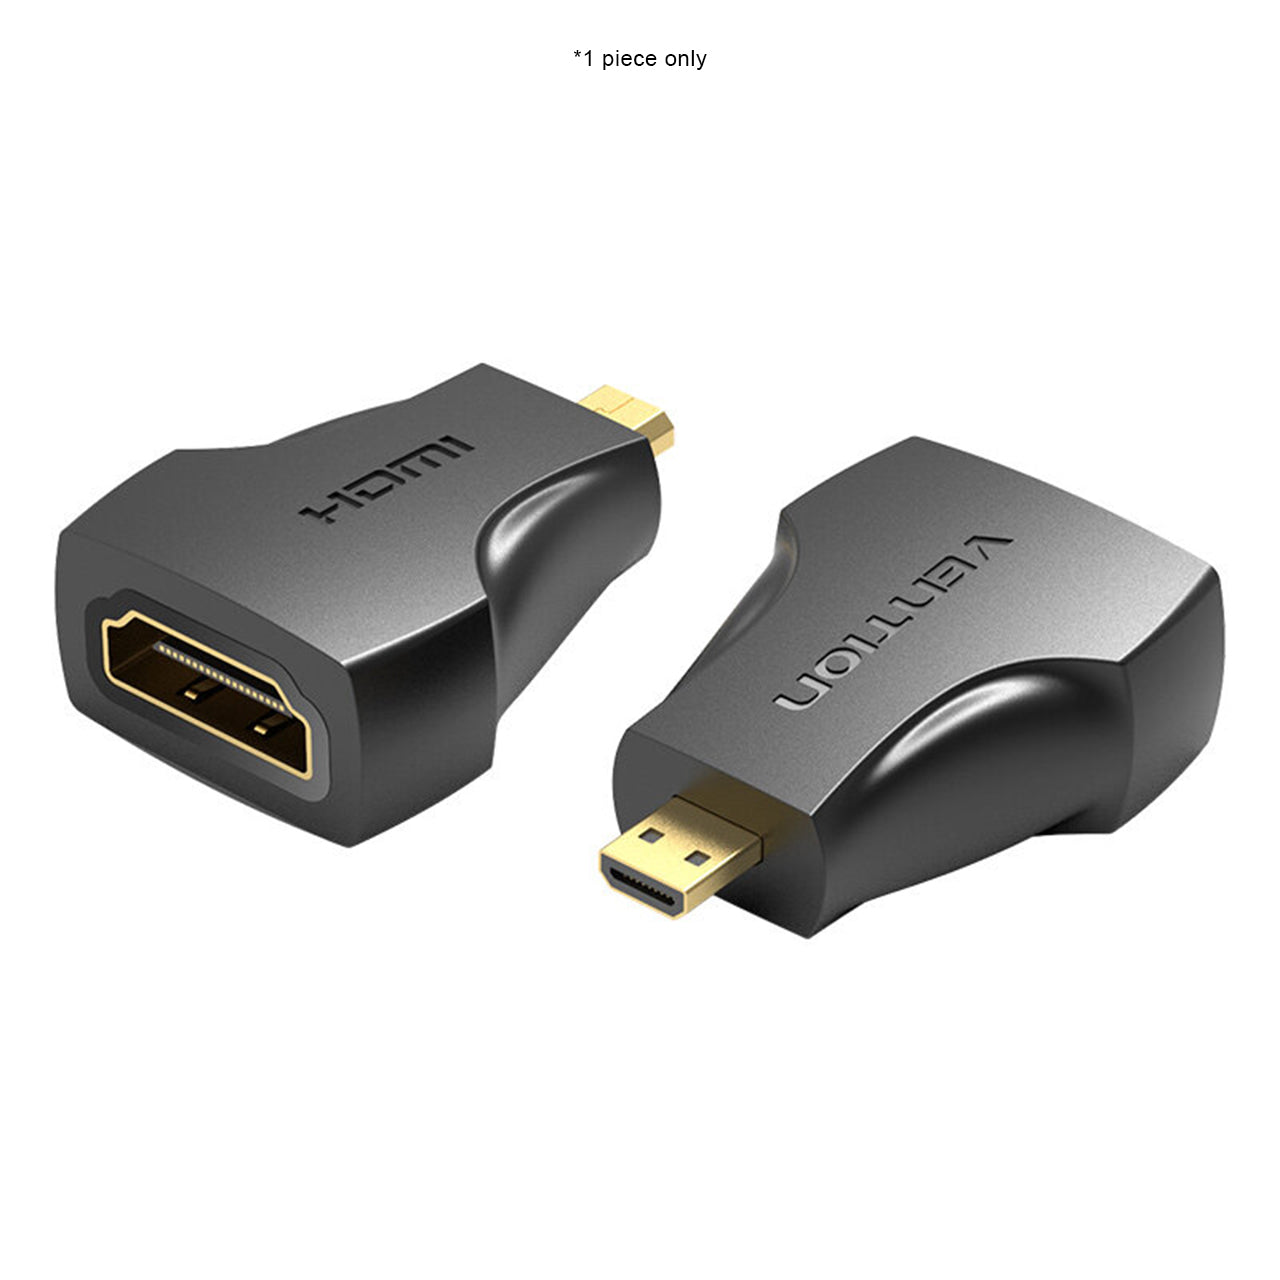 Vention Micro HDMI Male to HDMI Female Adapter 1080p 60Hz Gold-plated Rust/Oxidation Resistant for Stable Transmission (AITBO)